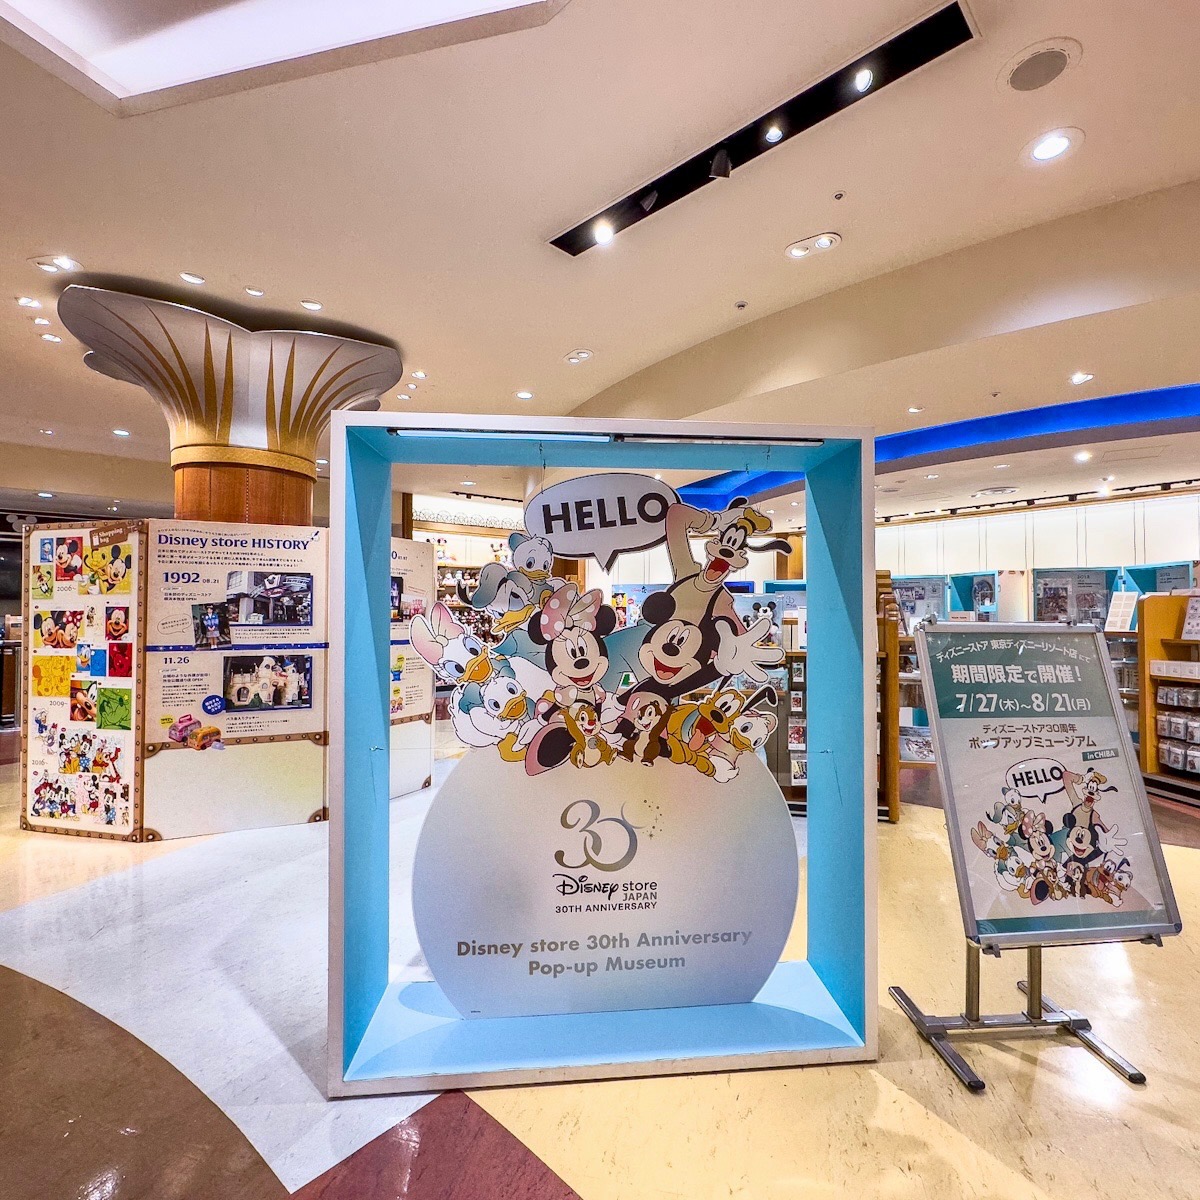 「Disney store 30th Anniversary Pop-up Museum」＠ディズニーストア 東京ディズニーリゾート店